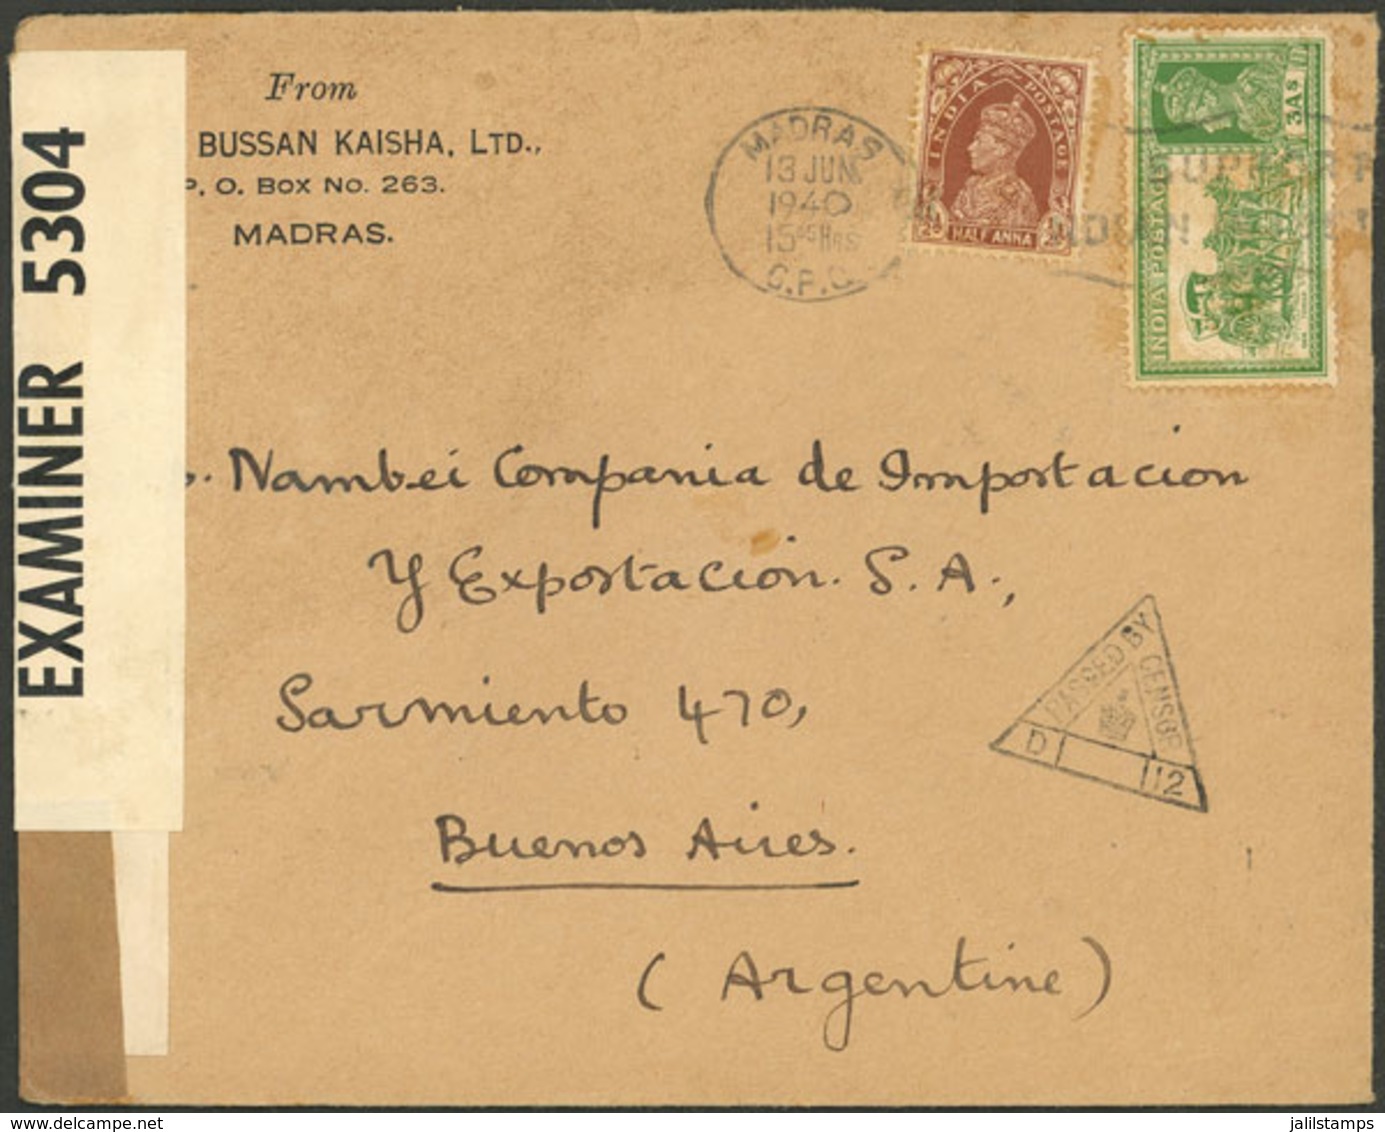 INDIA: 13/JUN/1940 Madras - Argentina, Cover Franked With 3½a., With Double Indian + British Censorship, VF! - Briefe U. Dokumente